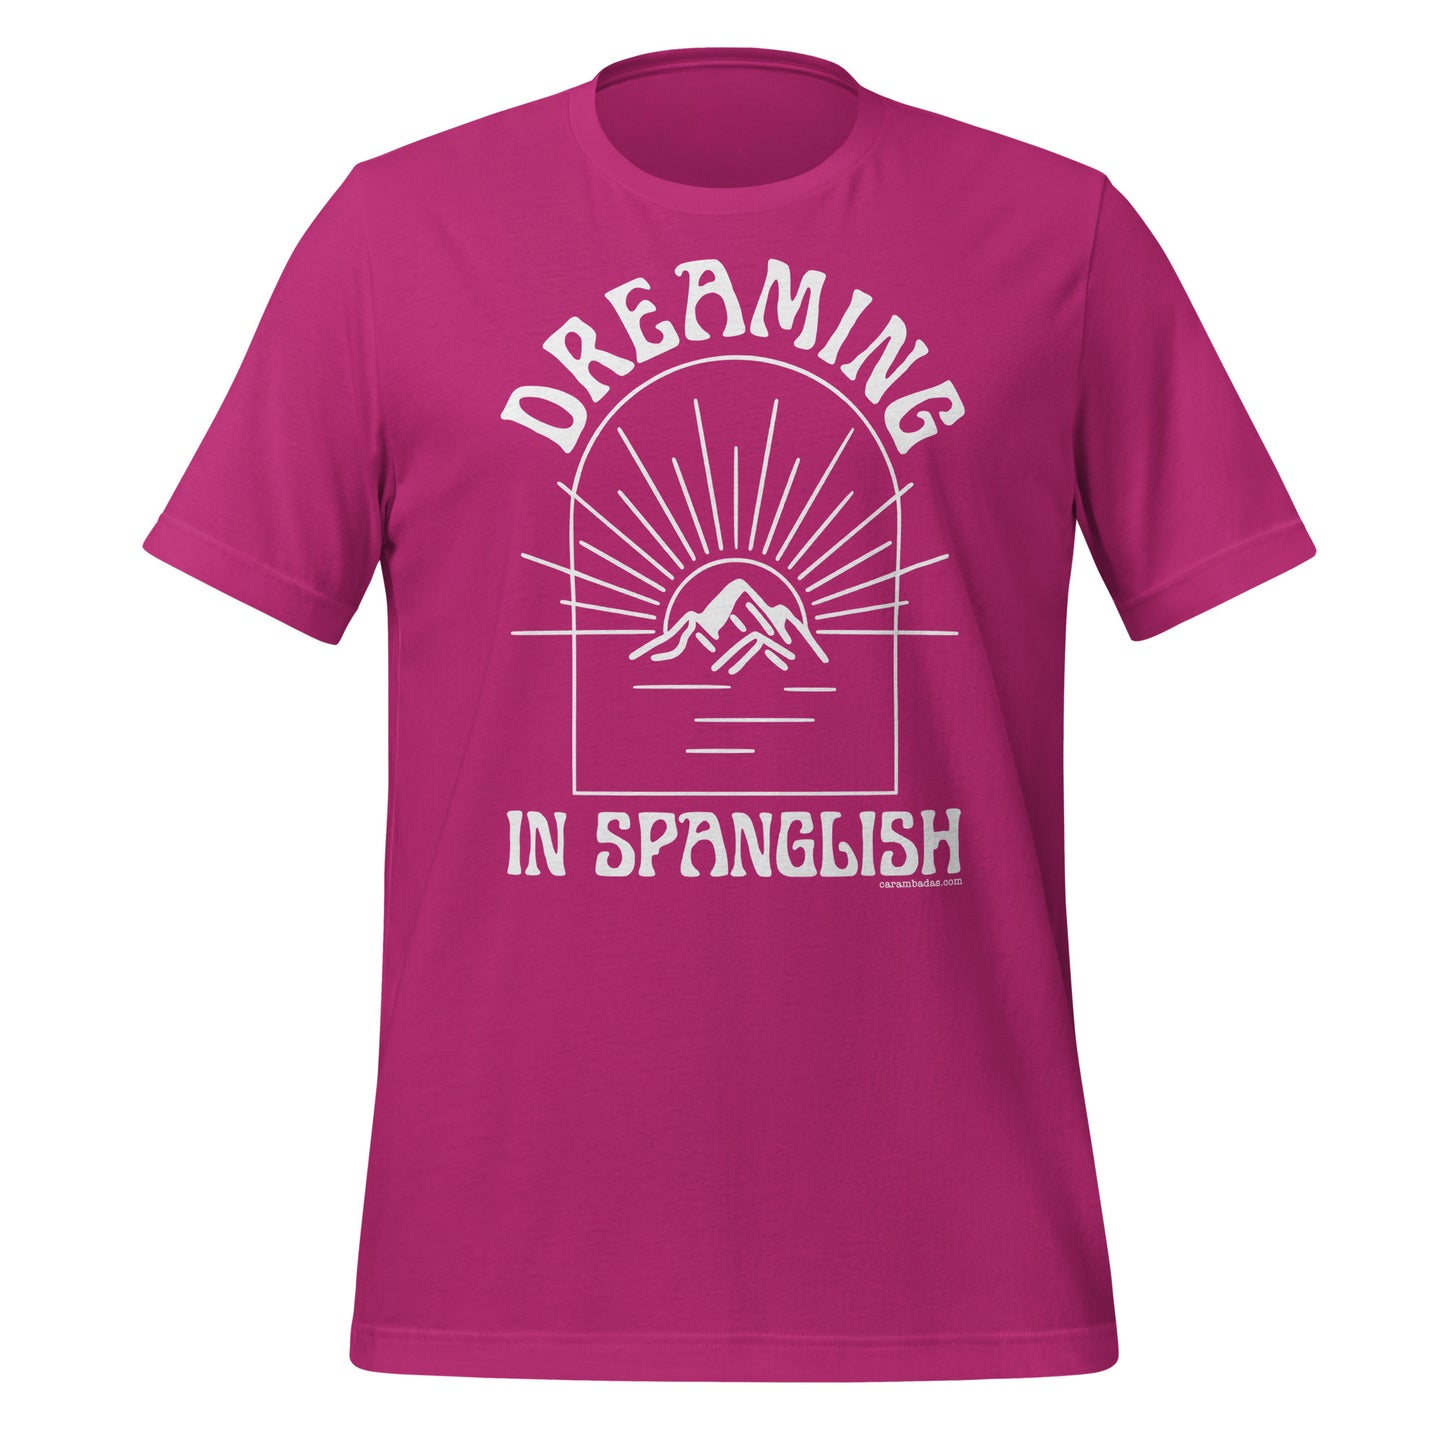 Dreaming as big as mountains in Spanglish Unisex t-shirt